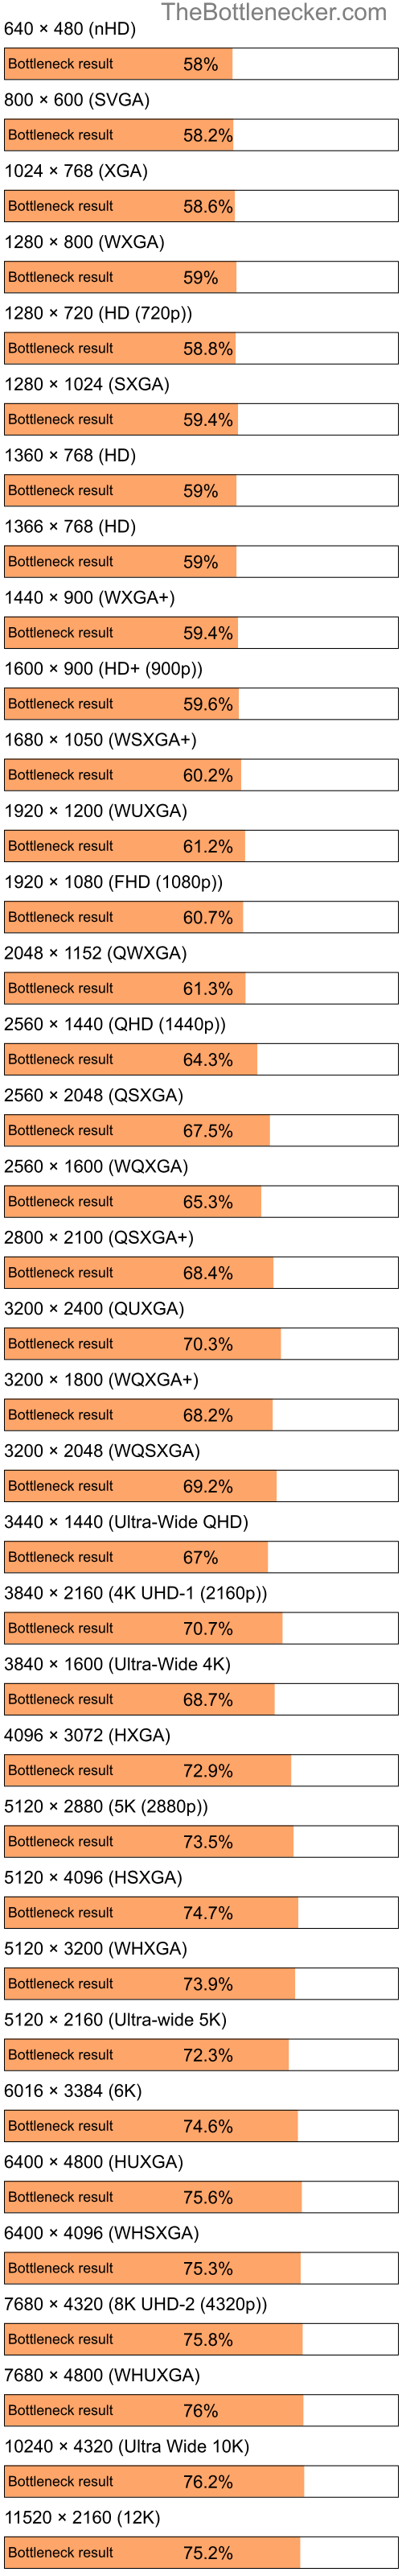 Bottleneck results by resolution for Intel Pentium 4 and AMD Mobility Radeon HD 4250 in General Tasks